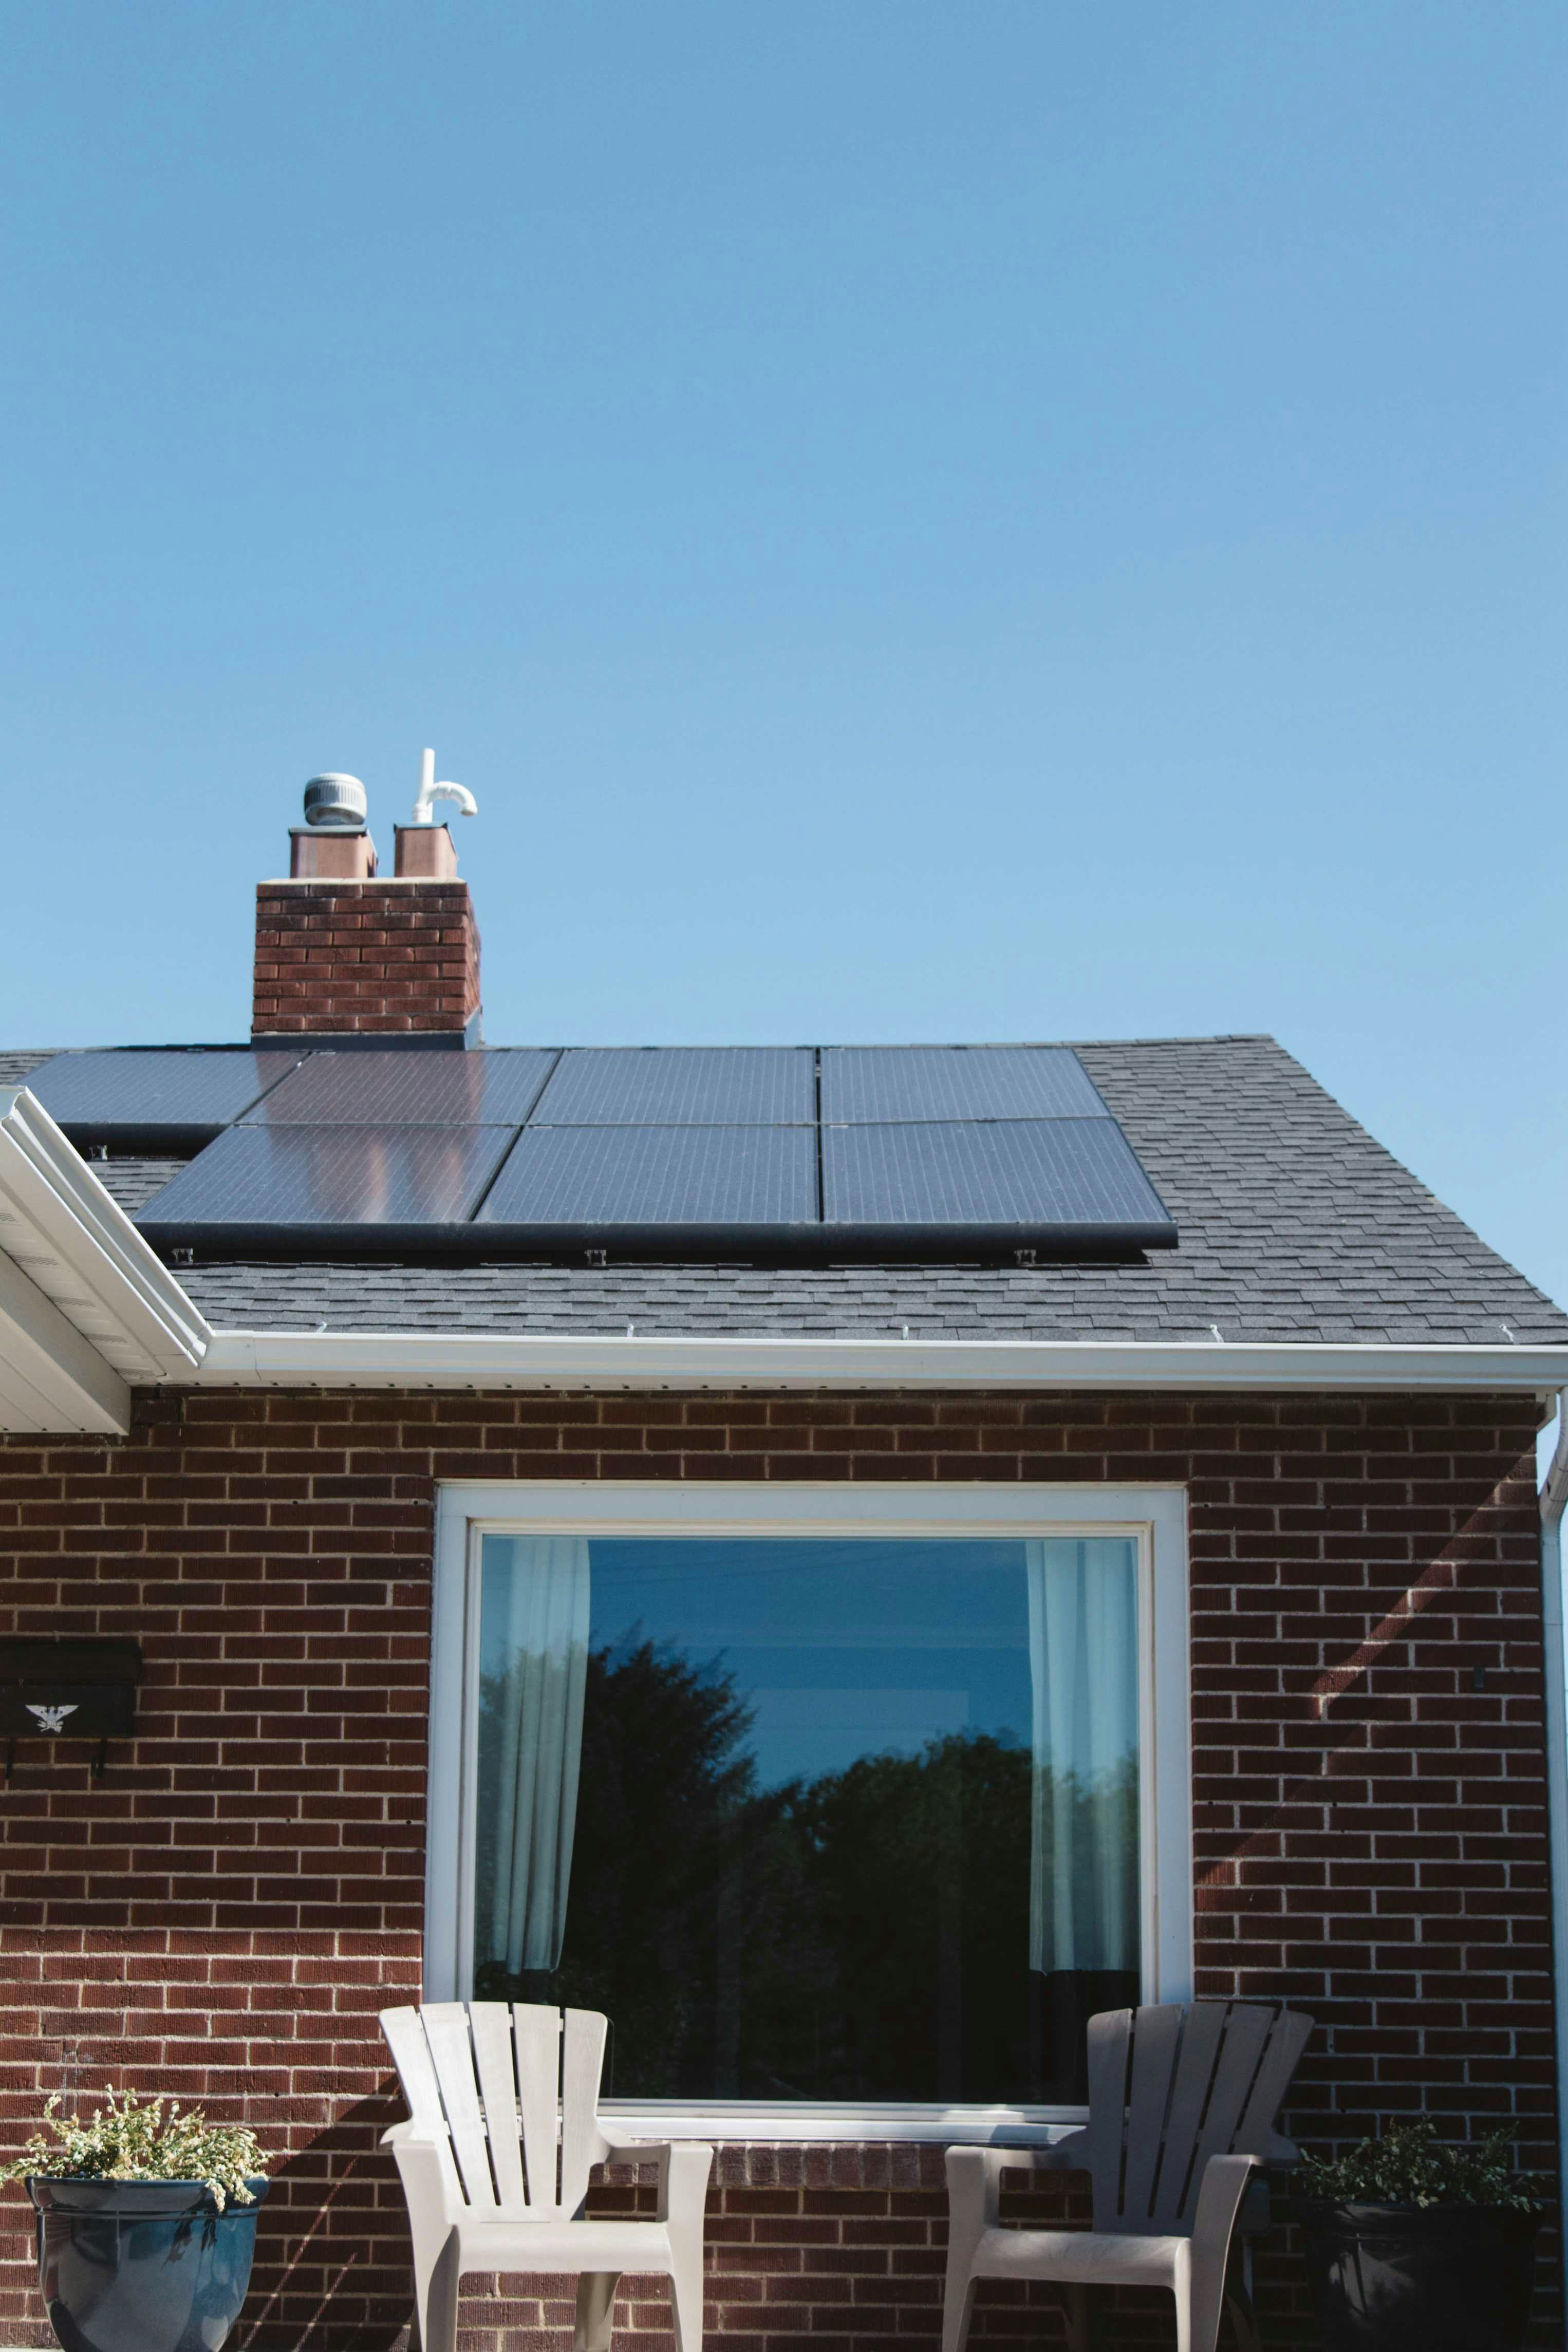 How much do solar panels increase your home value?